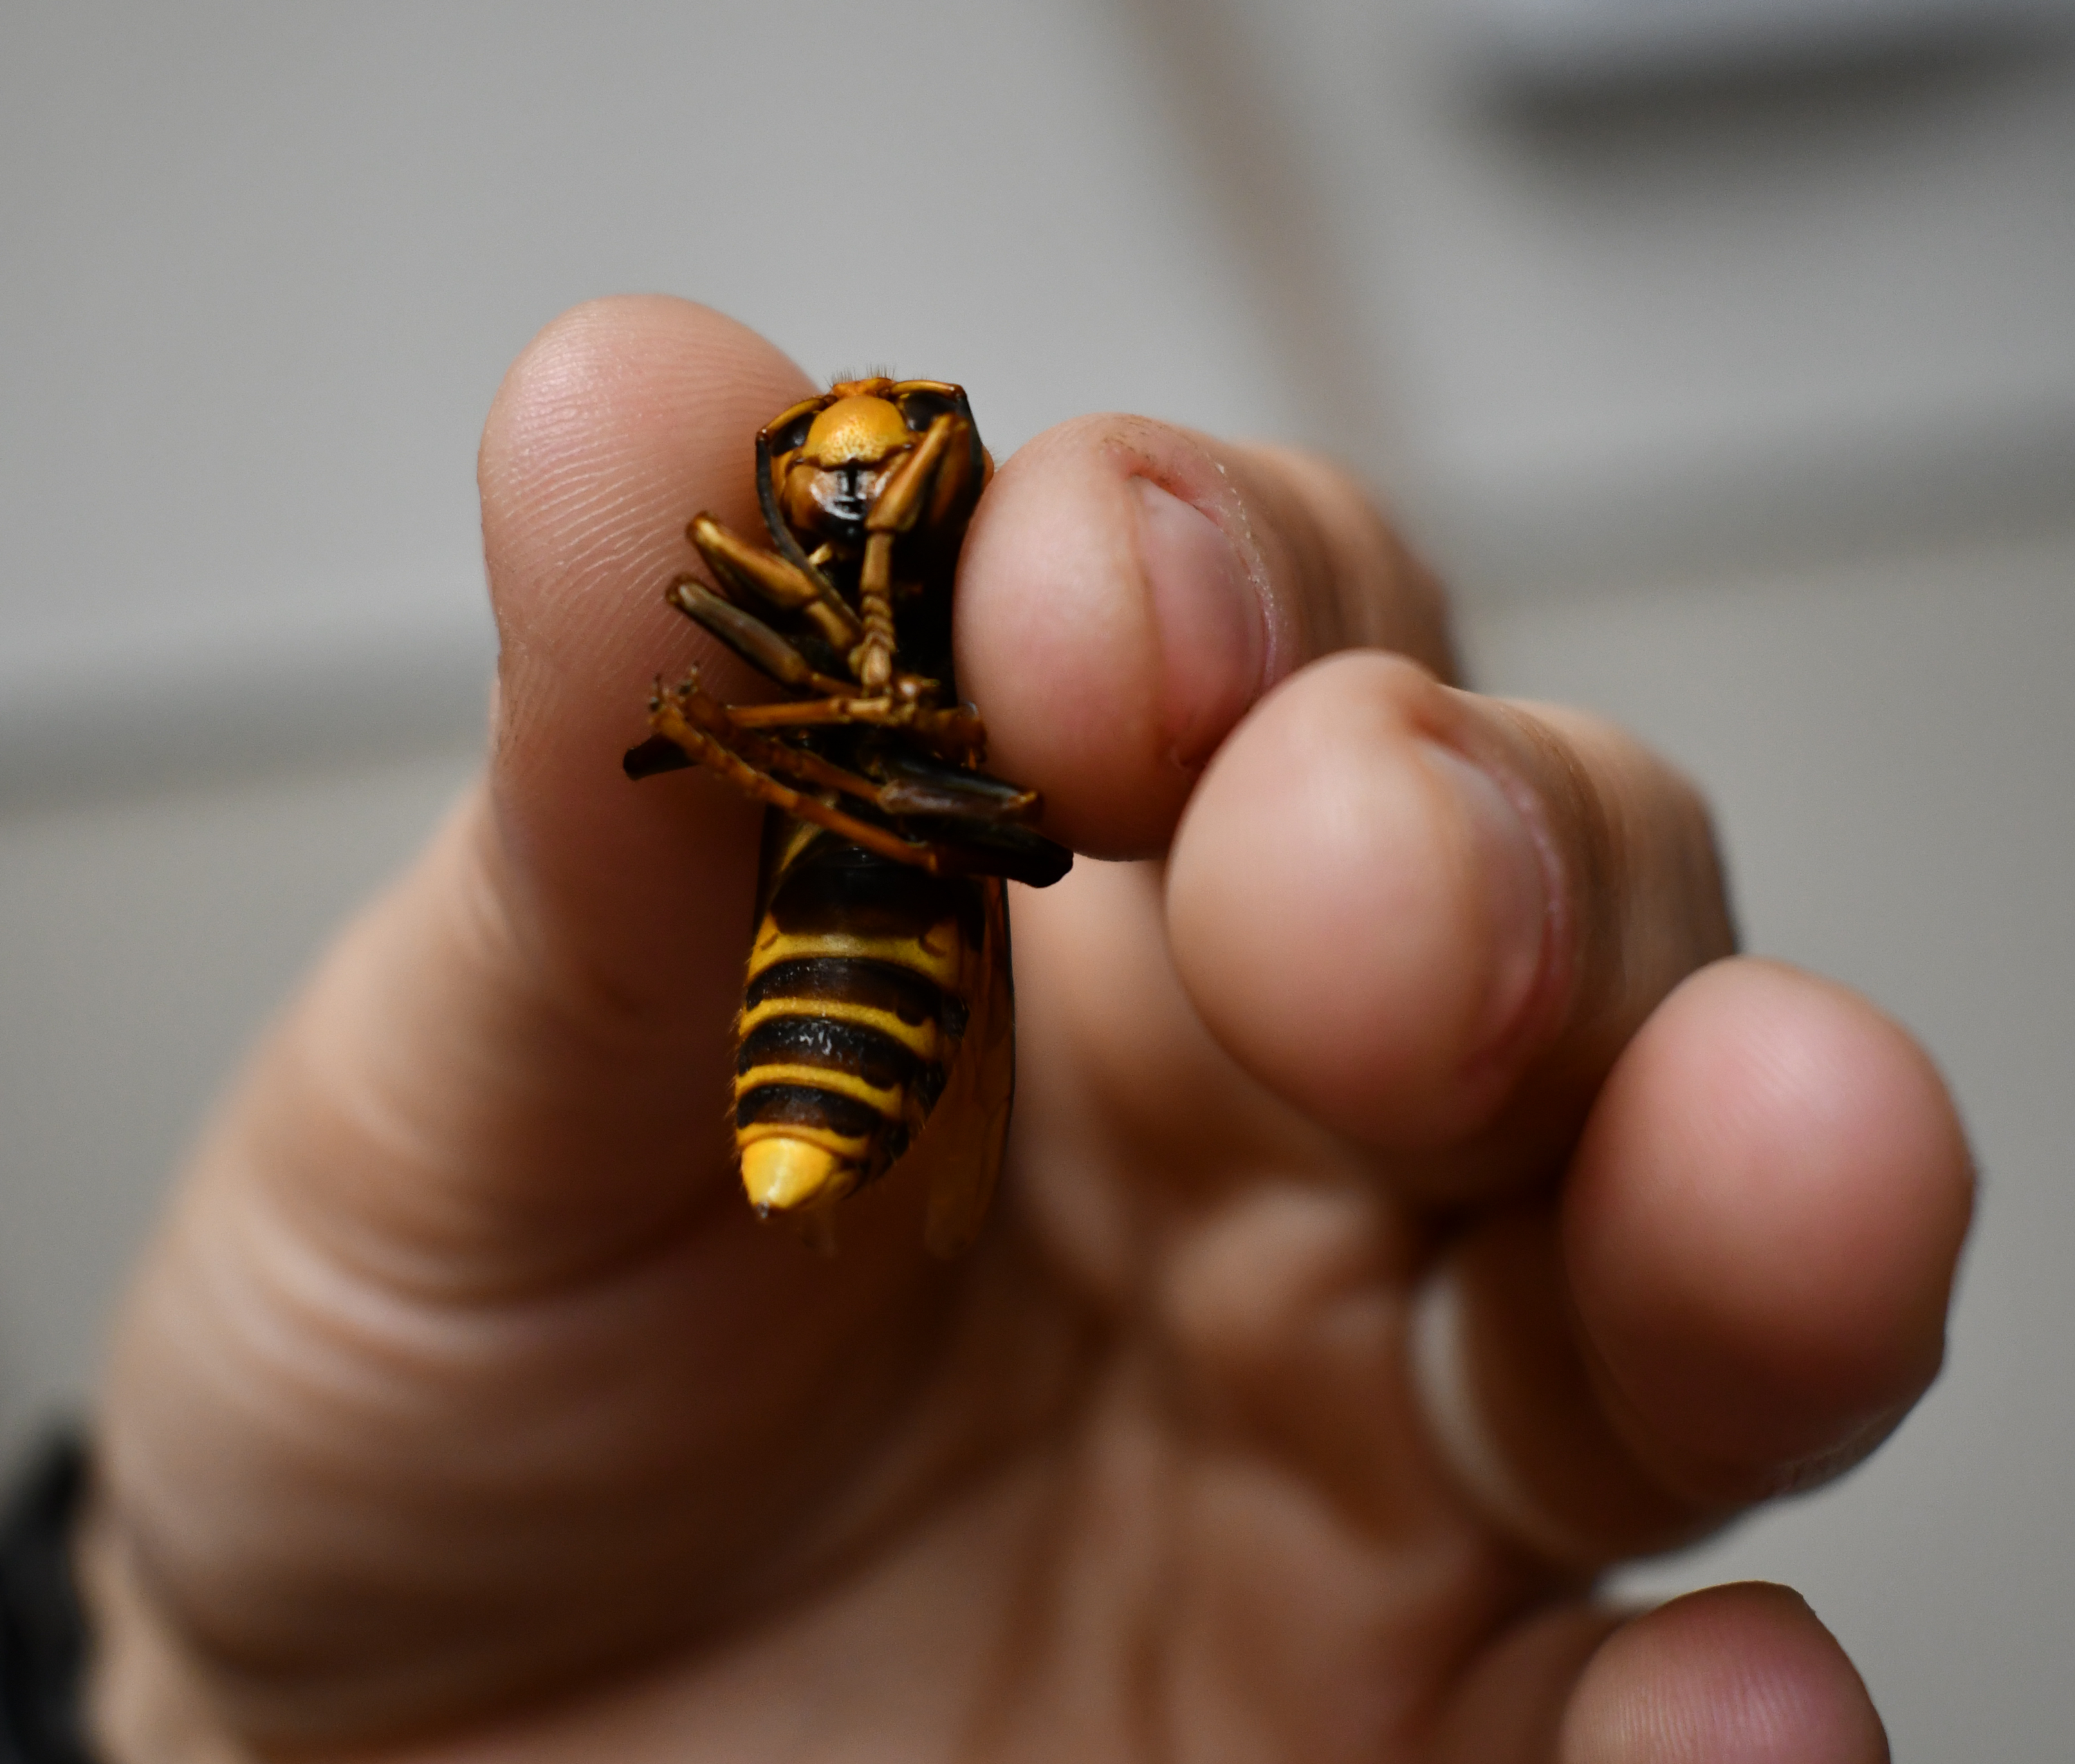 A Northern Giant Hornet